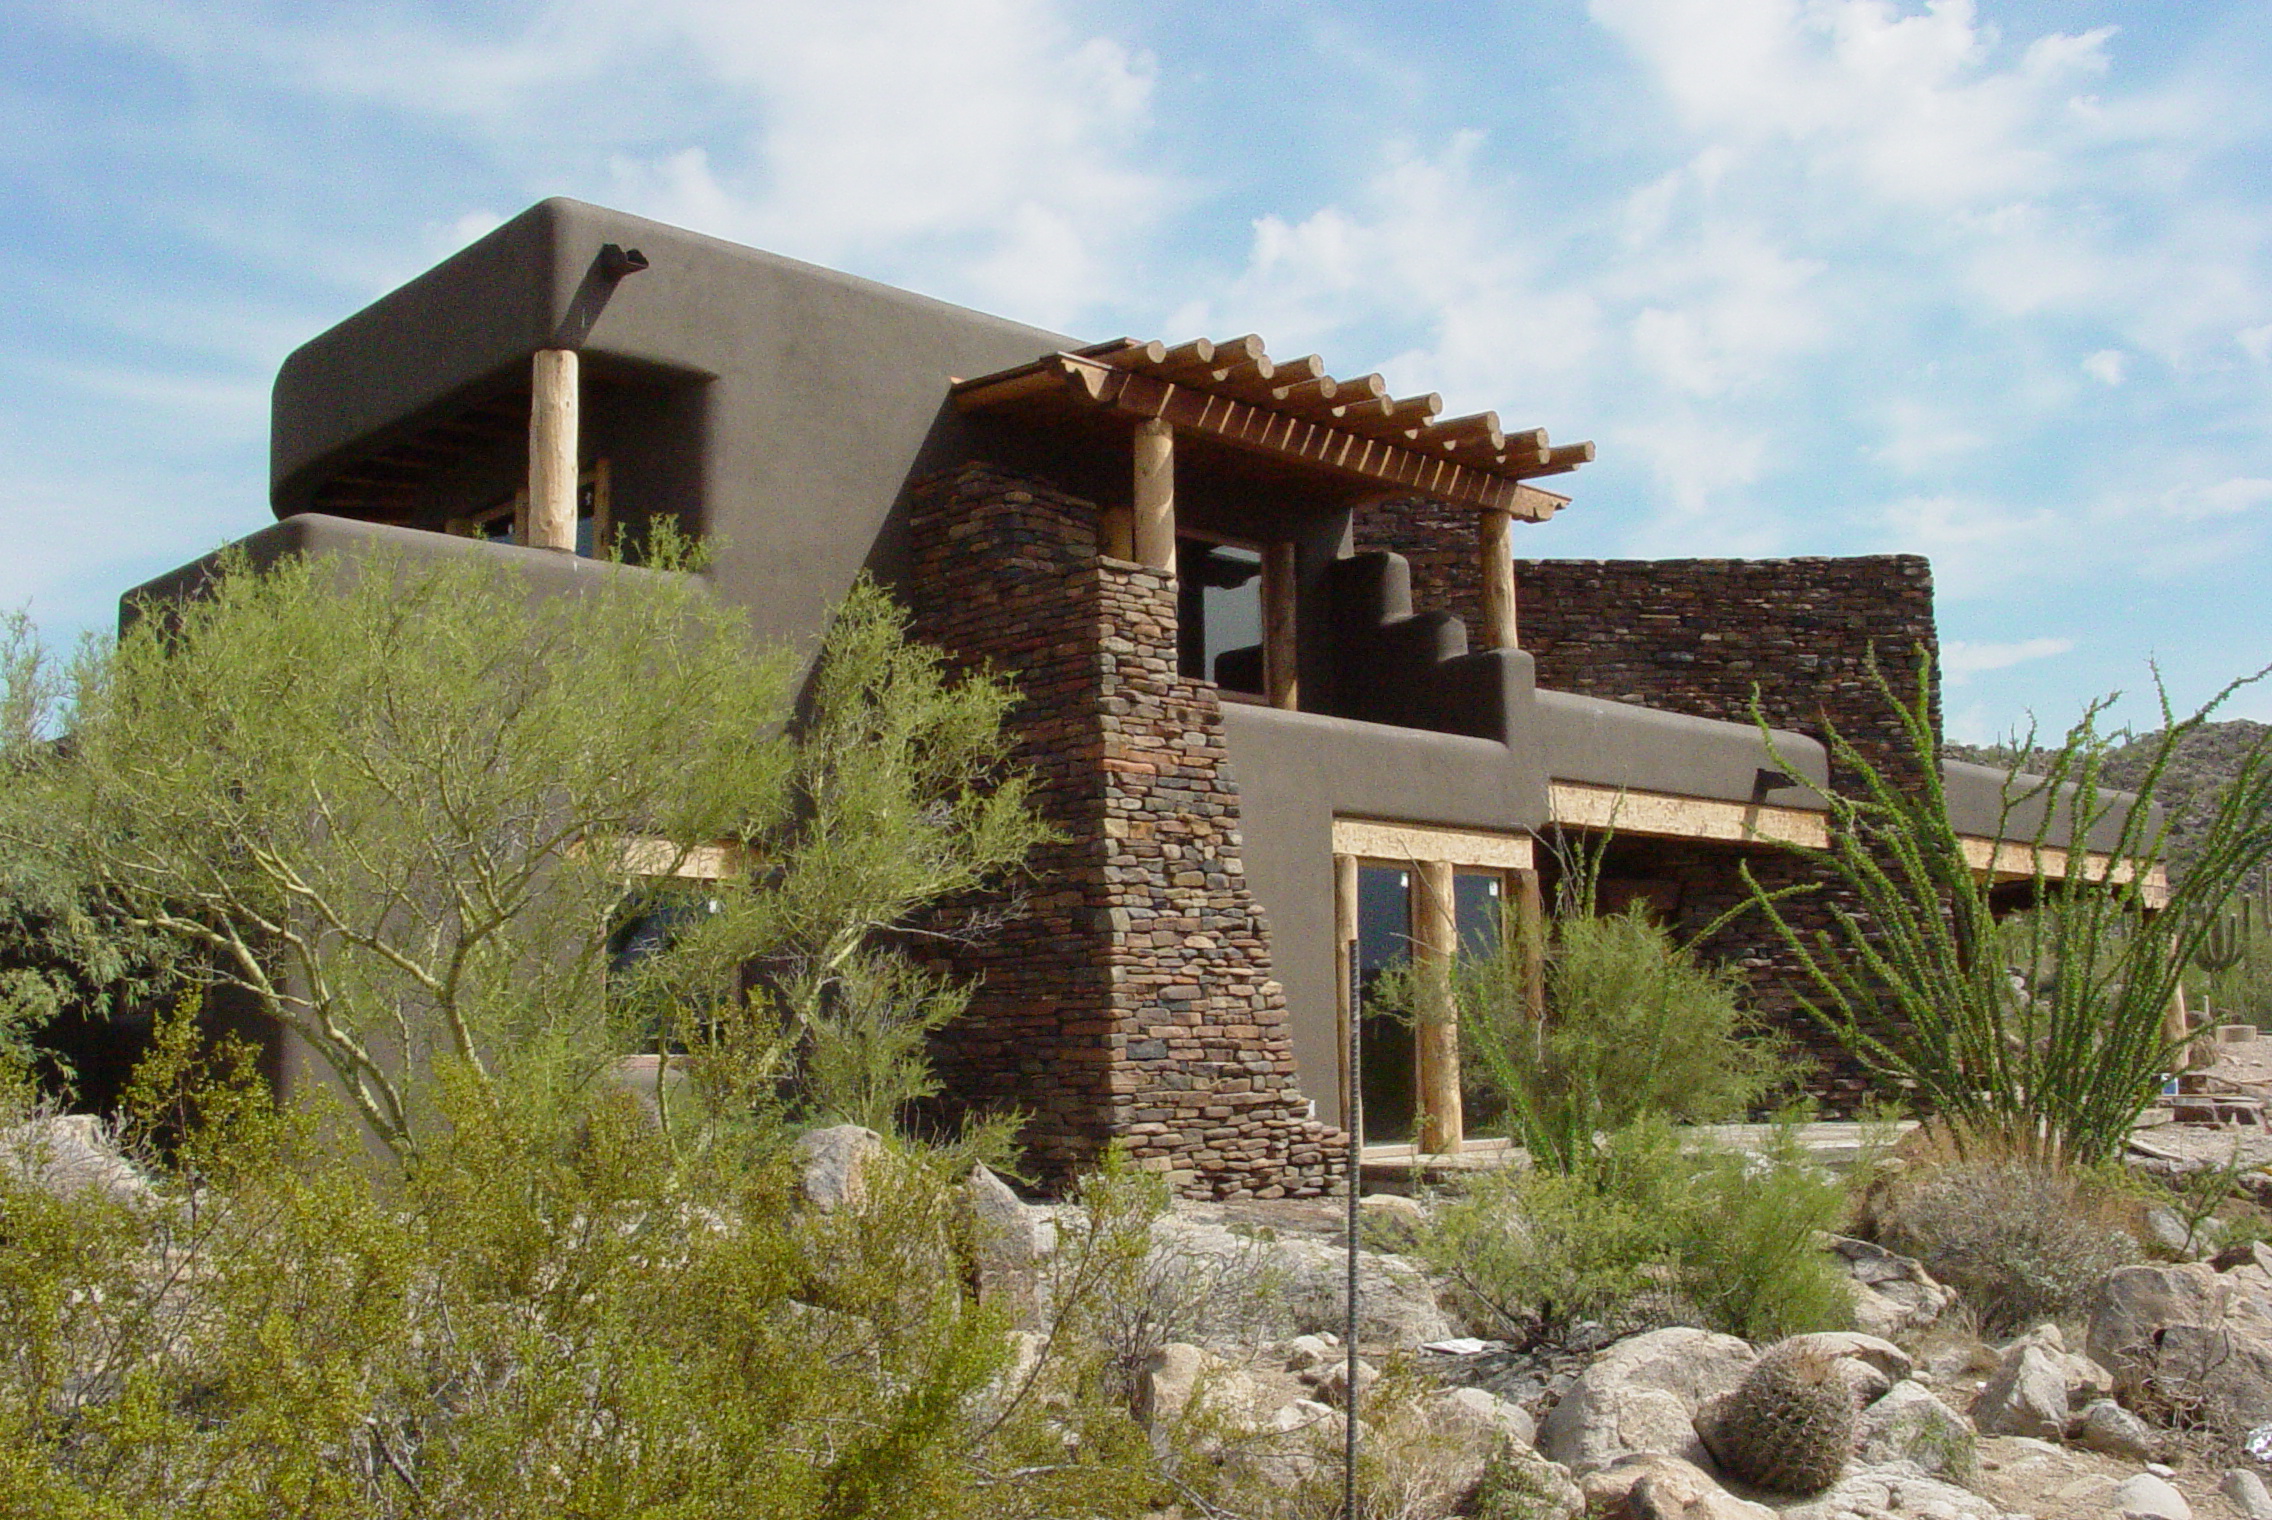 adobe and stone southwestern home exterior image